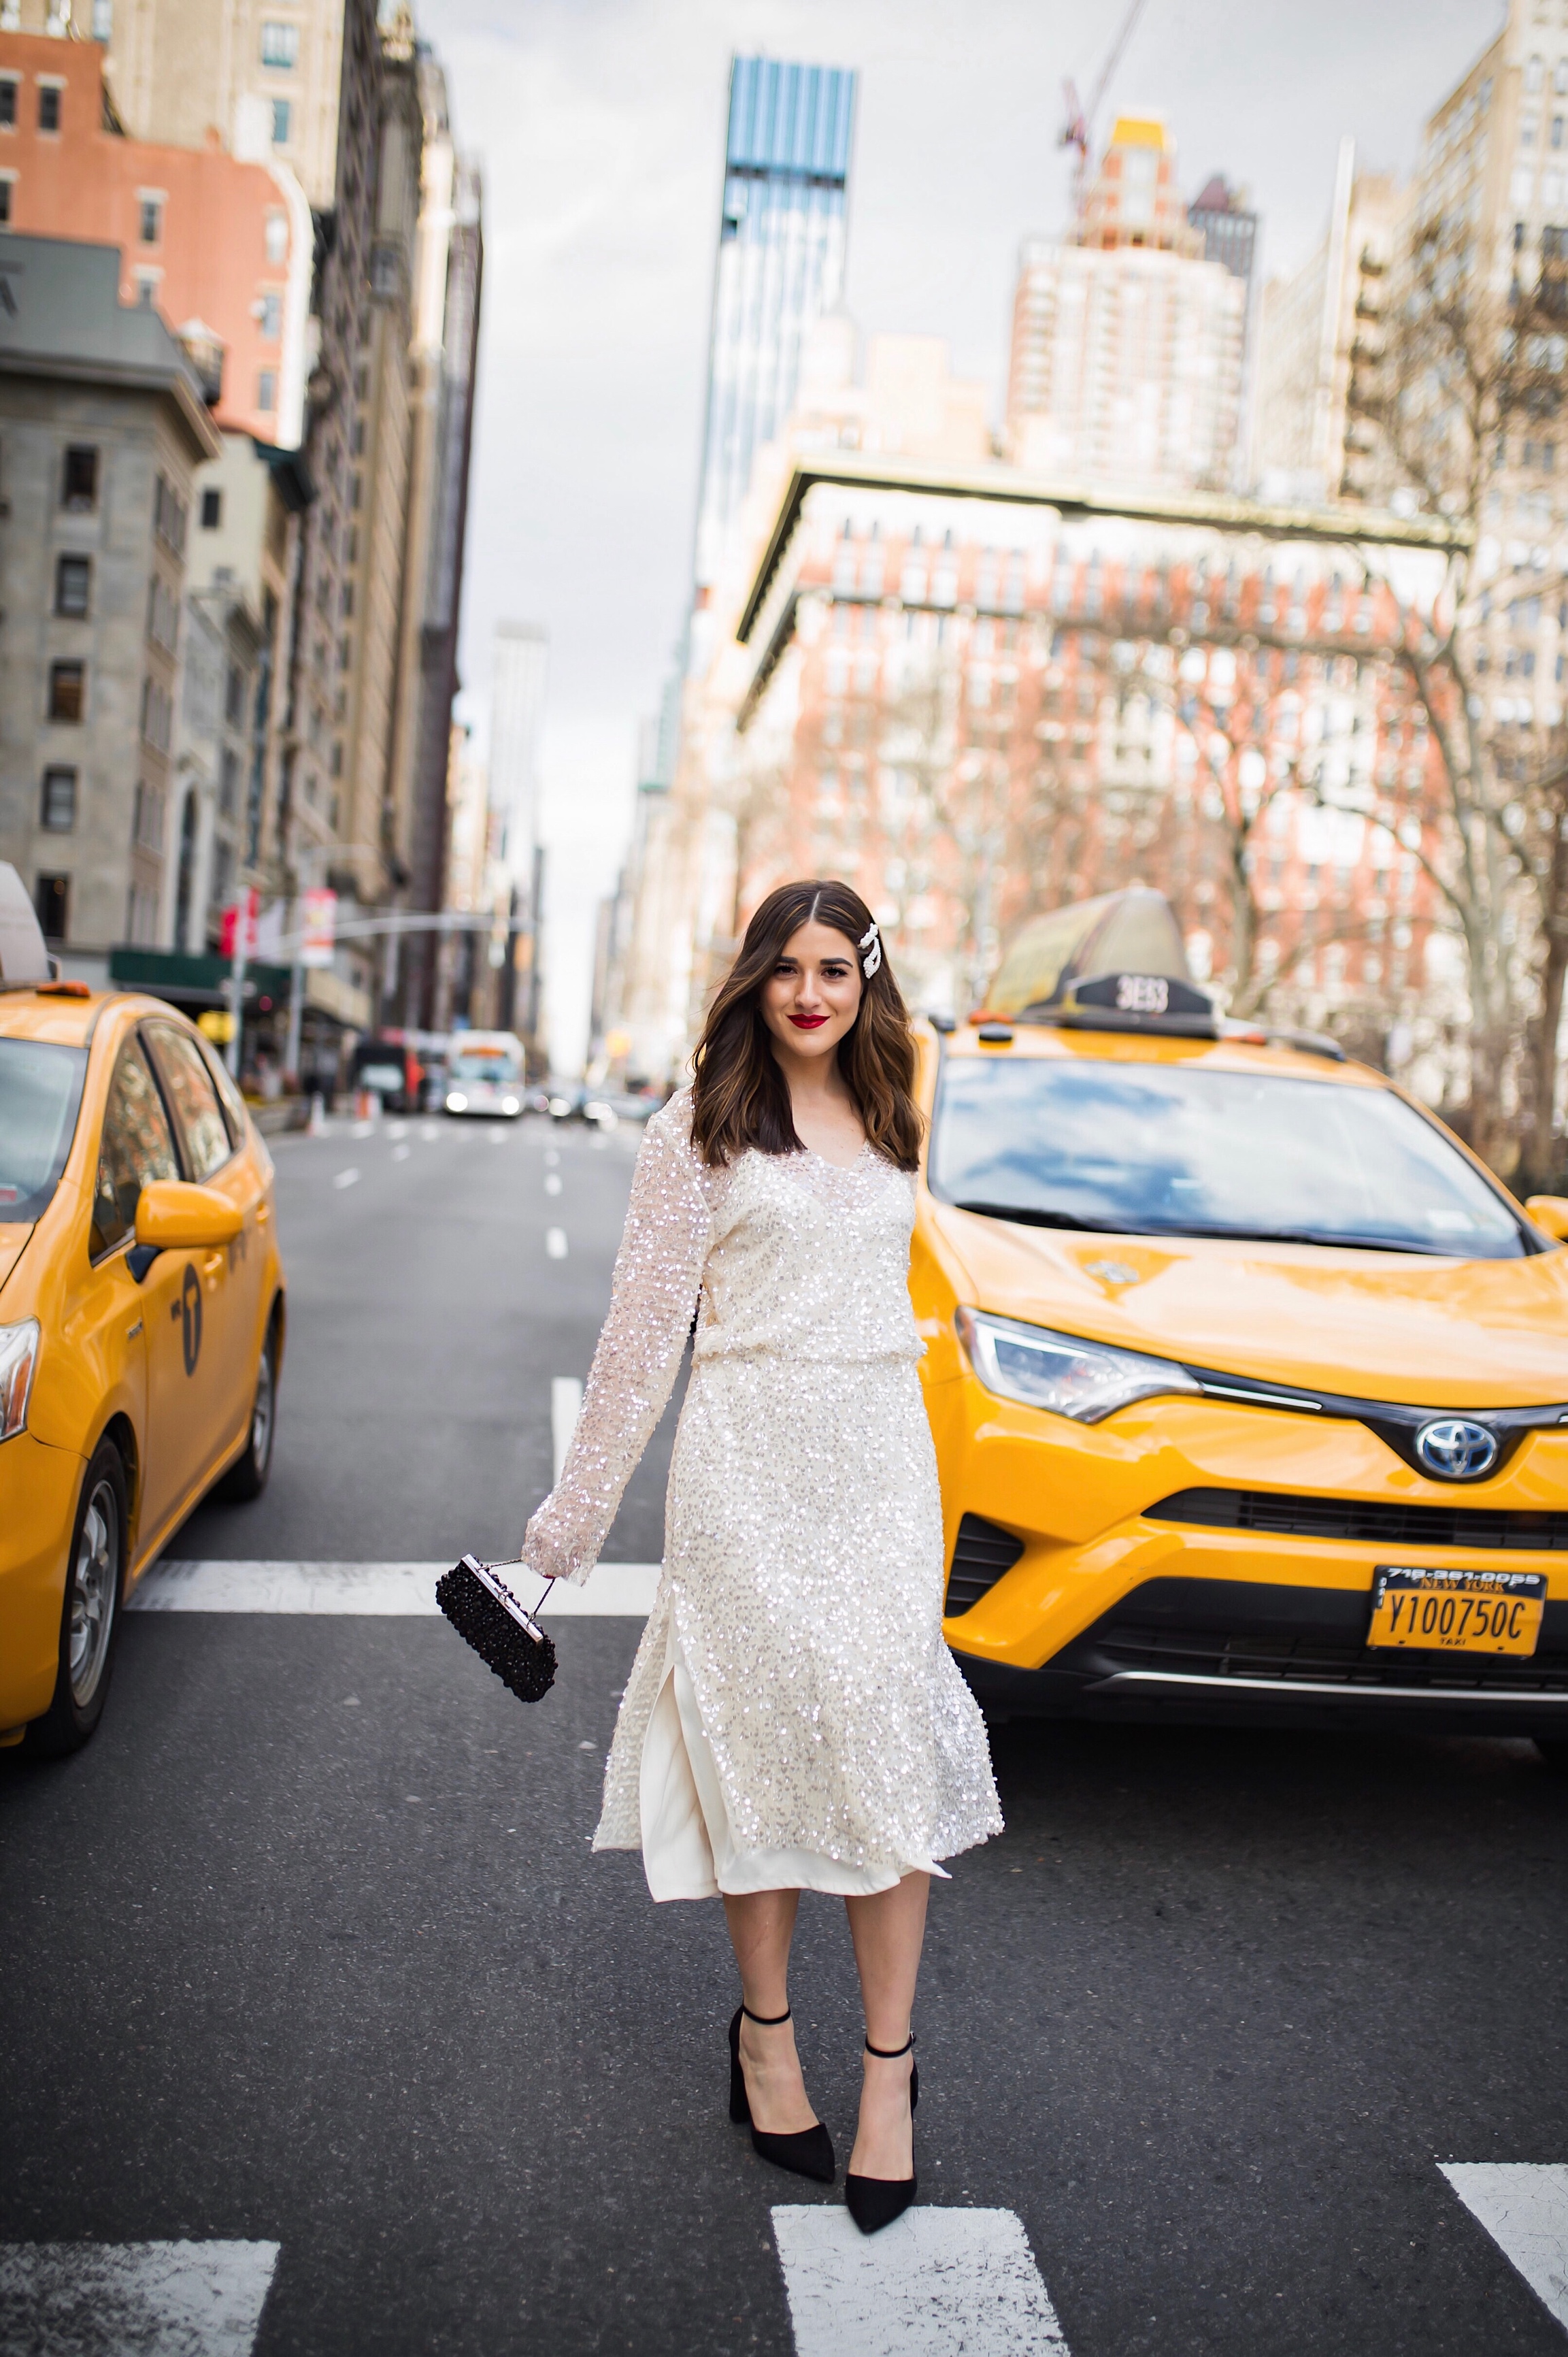 10 Ways To Be An Amazing Houseguest Sequined Midi Dress Black Heels Esther Santer Fashion Blog NYC Street Style Blogger Outfit OOTD Trendy Shopping Girl What How To Wear Beaded Clutch Pearl Hair Clips Zara Asos Taxi Shot Photoshoot  Inspo Bag Pretty.JPG